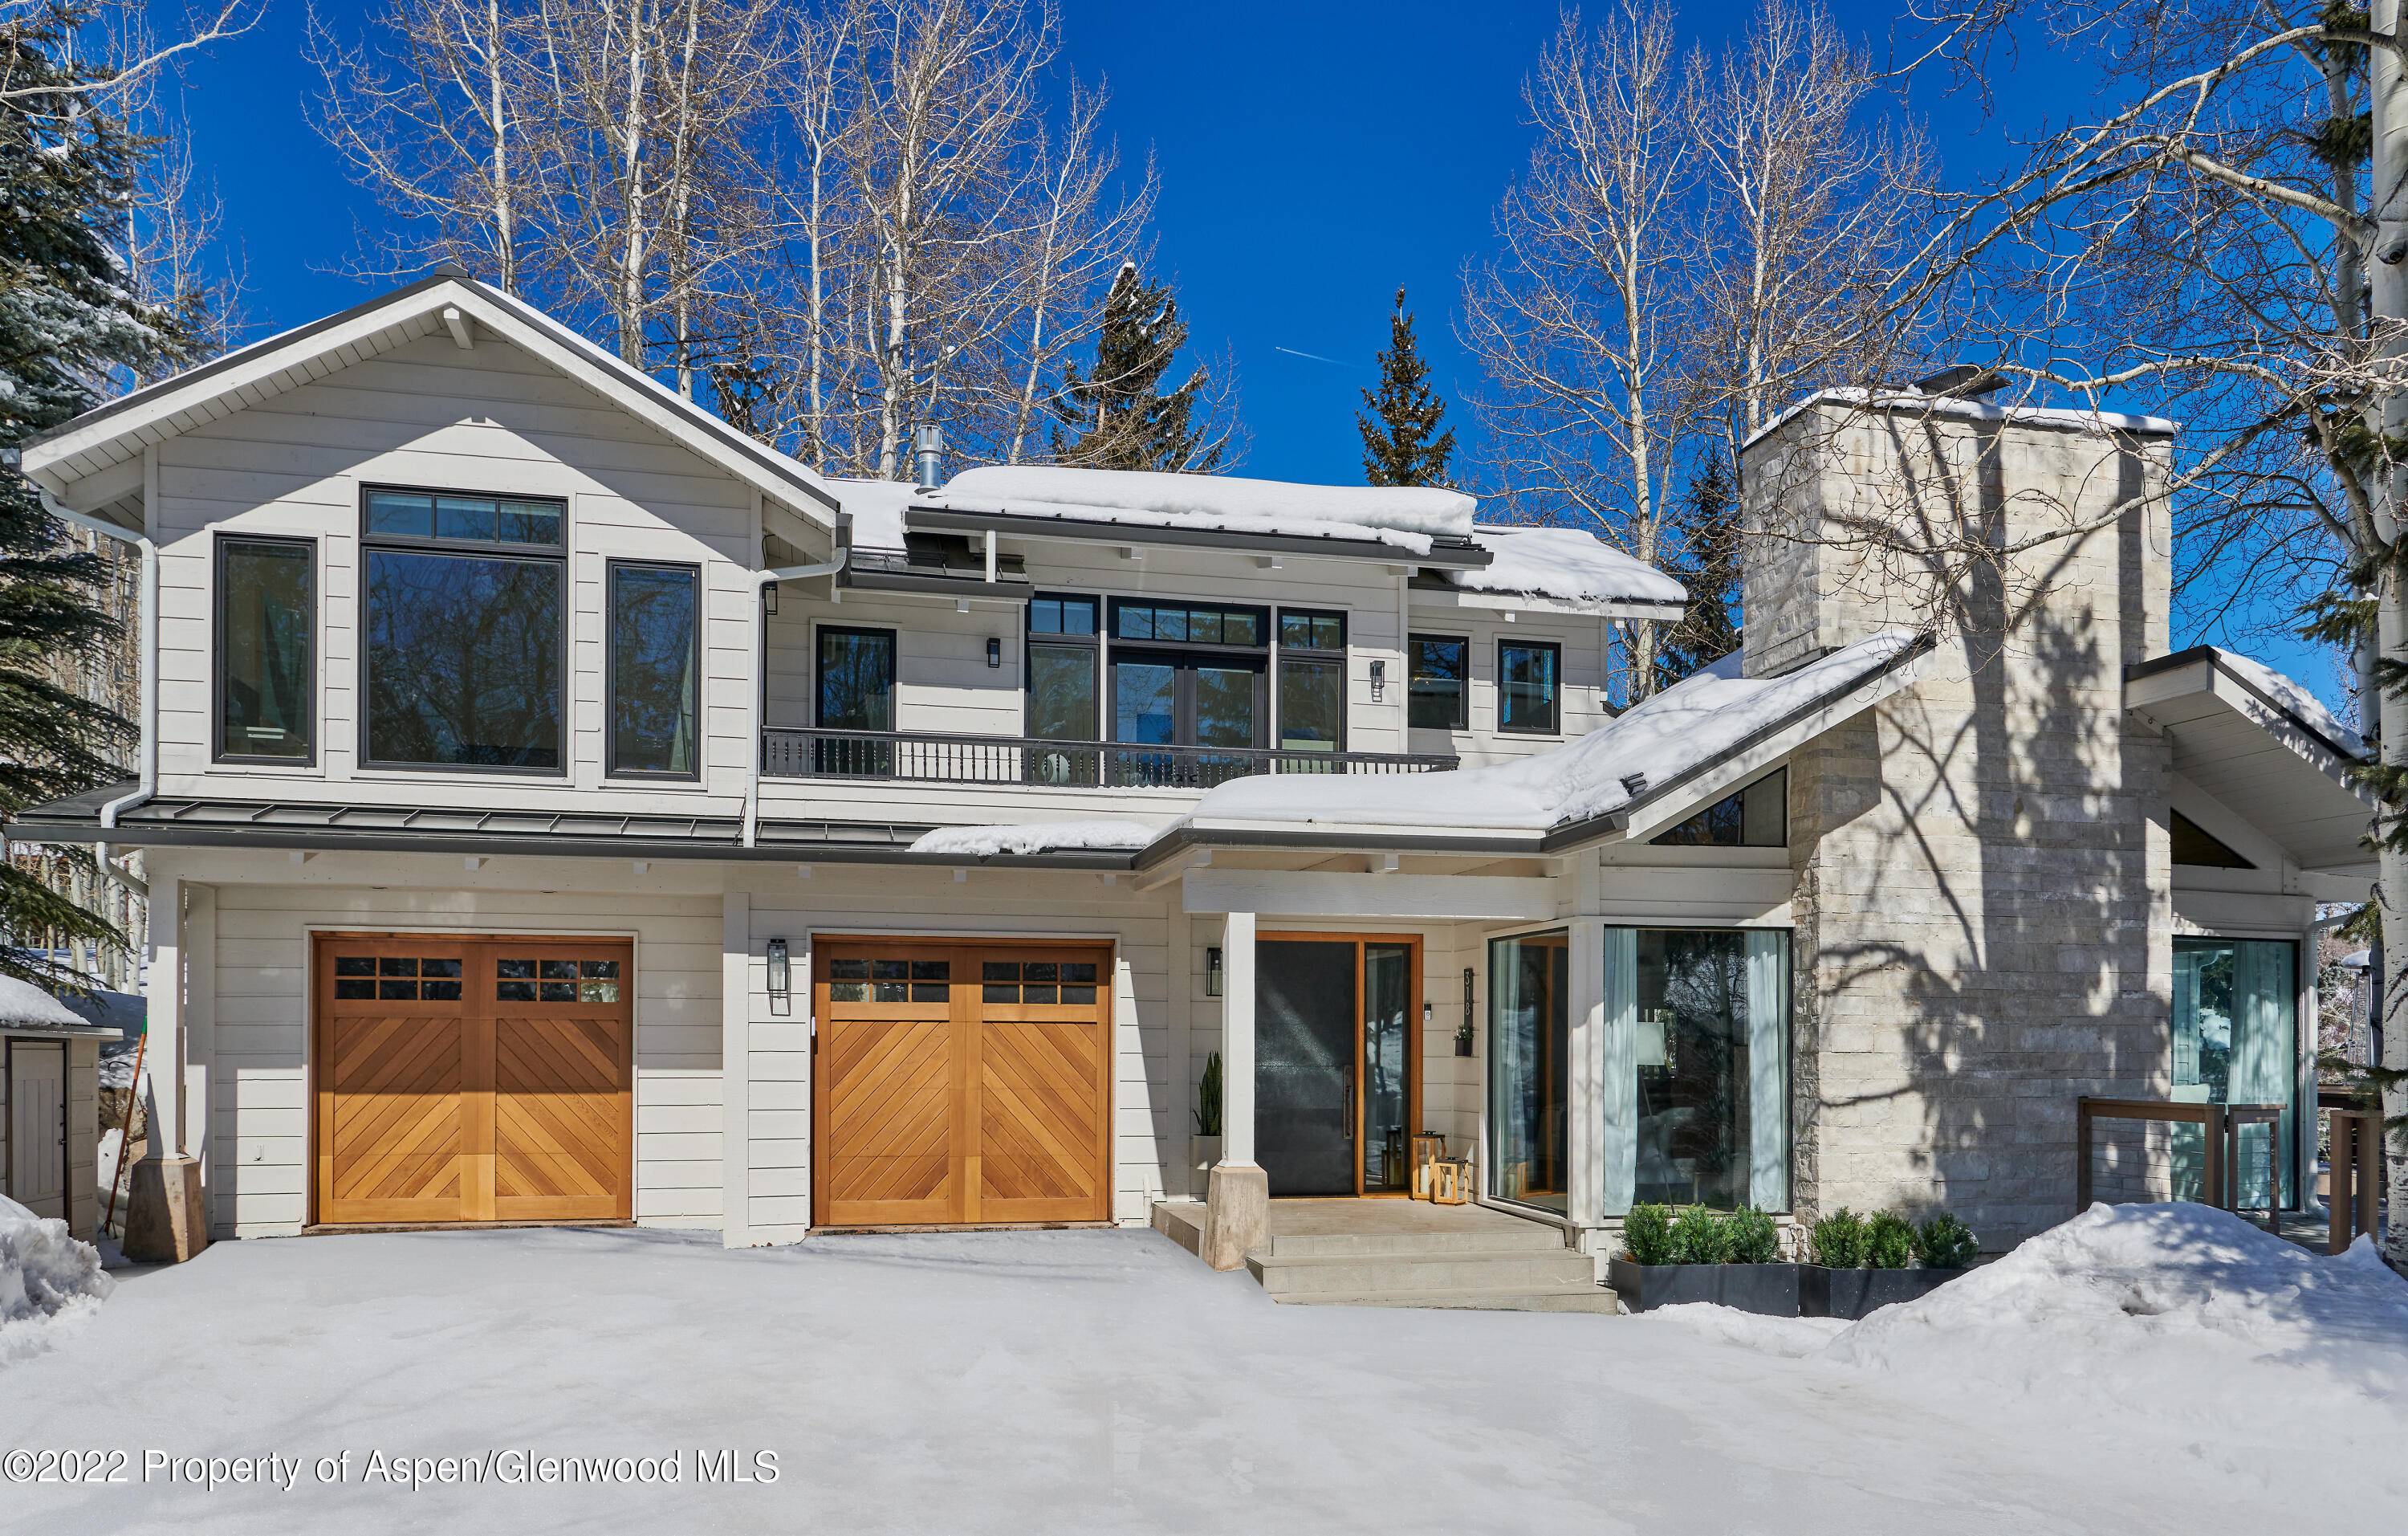 This stunning mountain modern home has been completely renovated over the last year and is beautifully decorated.